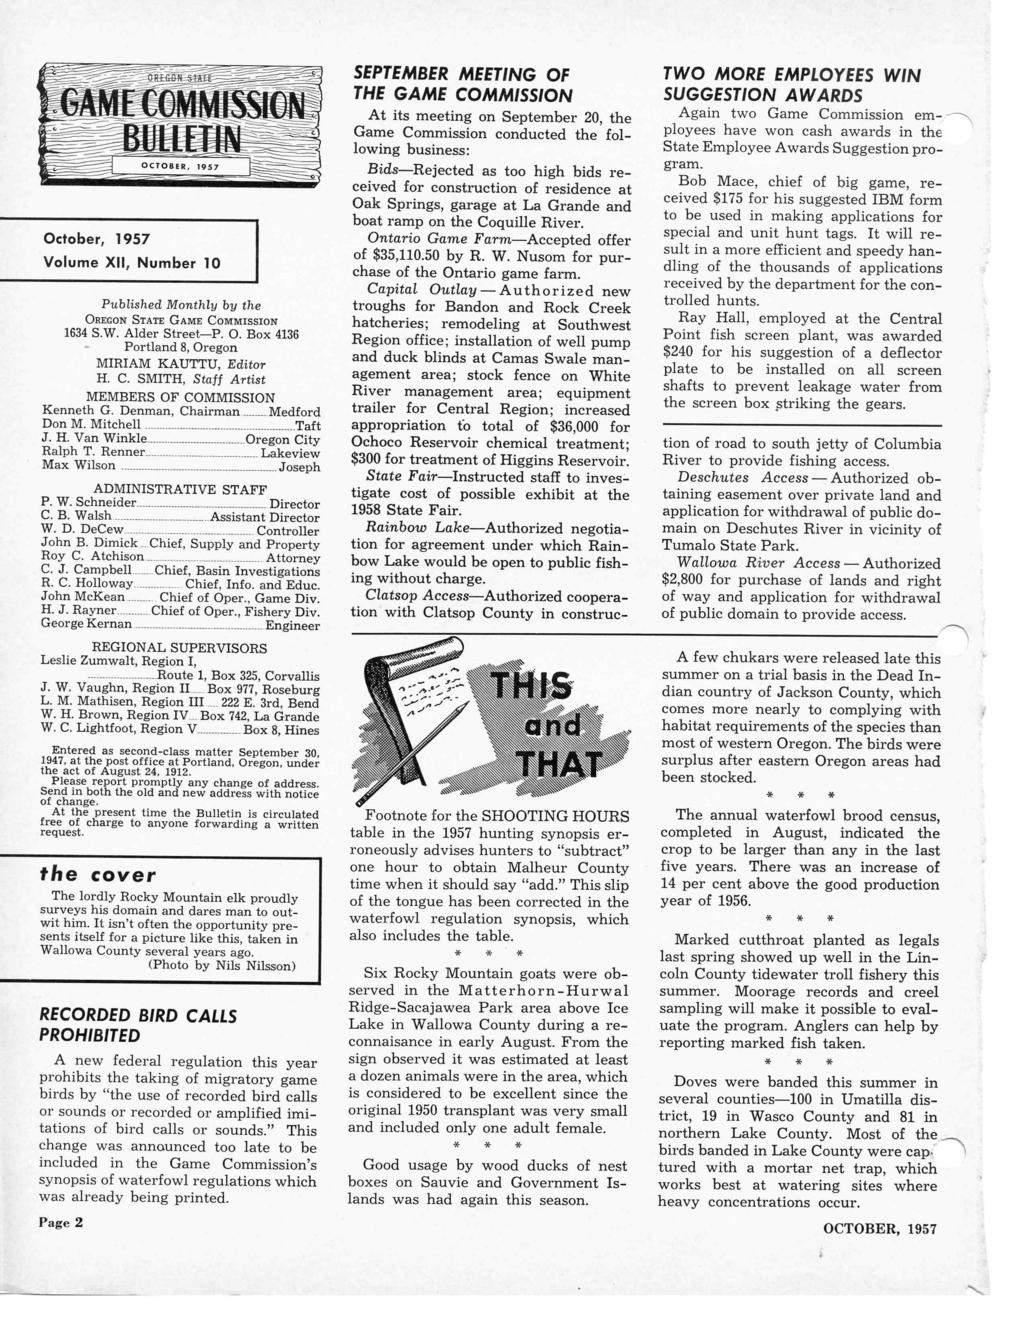 October, 1957 Volume XII, Number 10 Published Monthly by the OREGON STATE GAME COMMISSION 1634 S.W. Alder StreetP. 0. Box 4136 - Portland 8, Oregon MIRIAM KAUTM, Editor H. C. SMITH, Staff Artist MEMBERS OF COMMISSION Kenneth G.